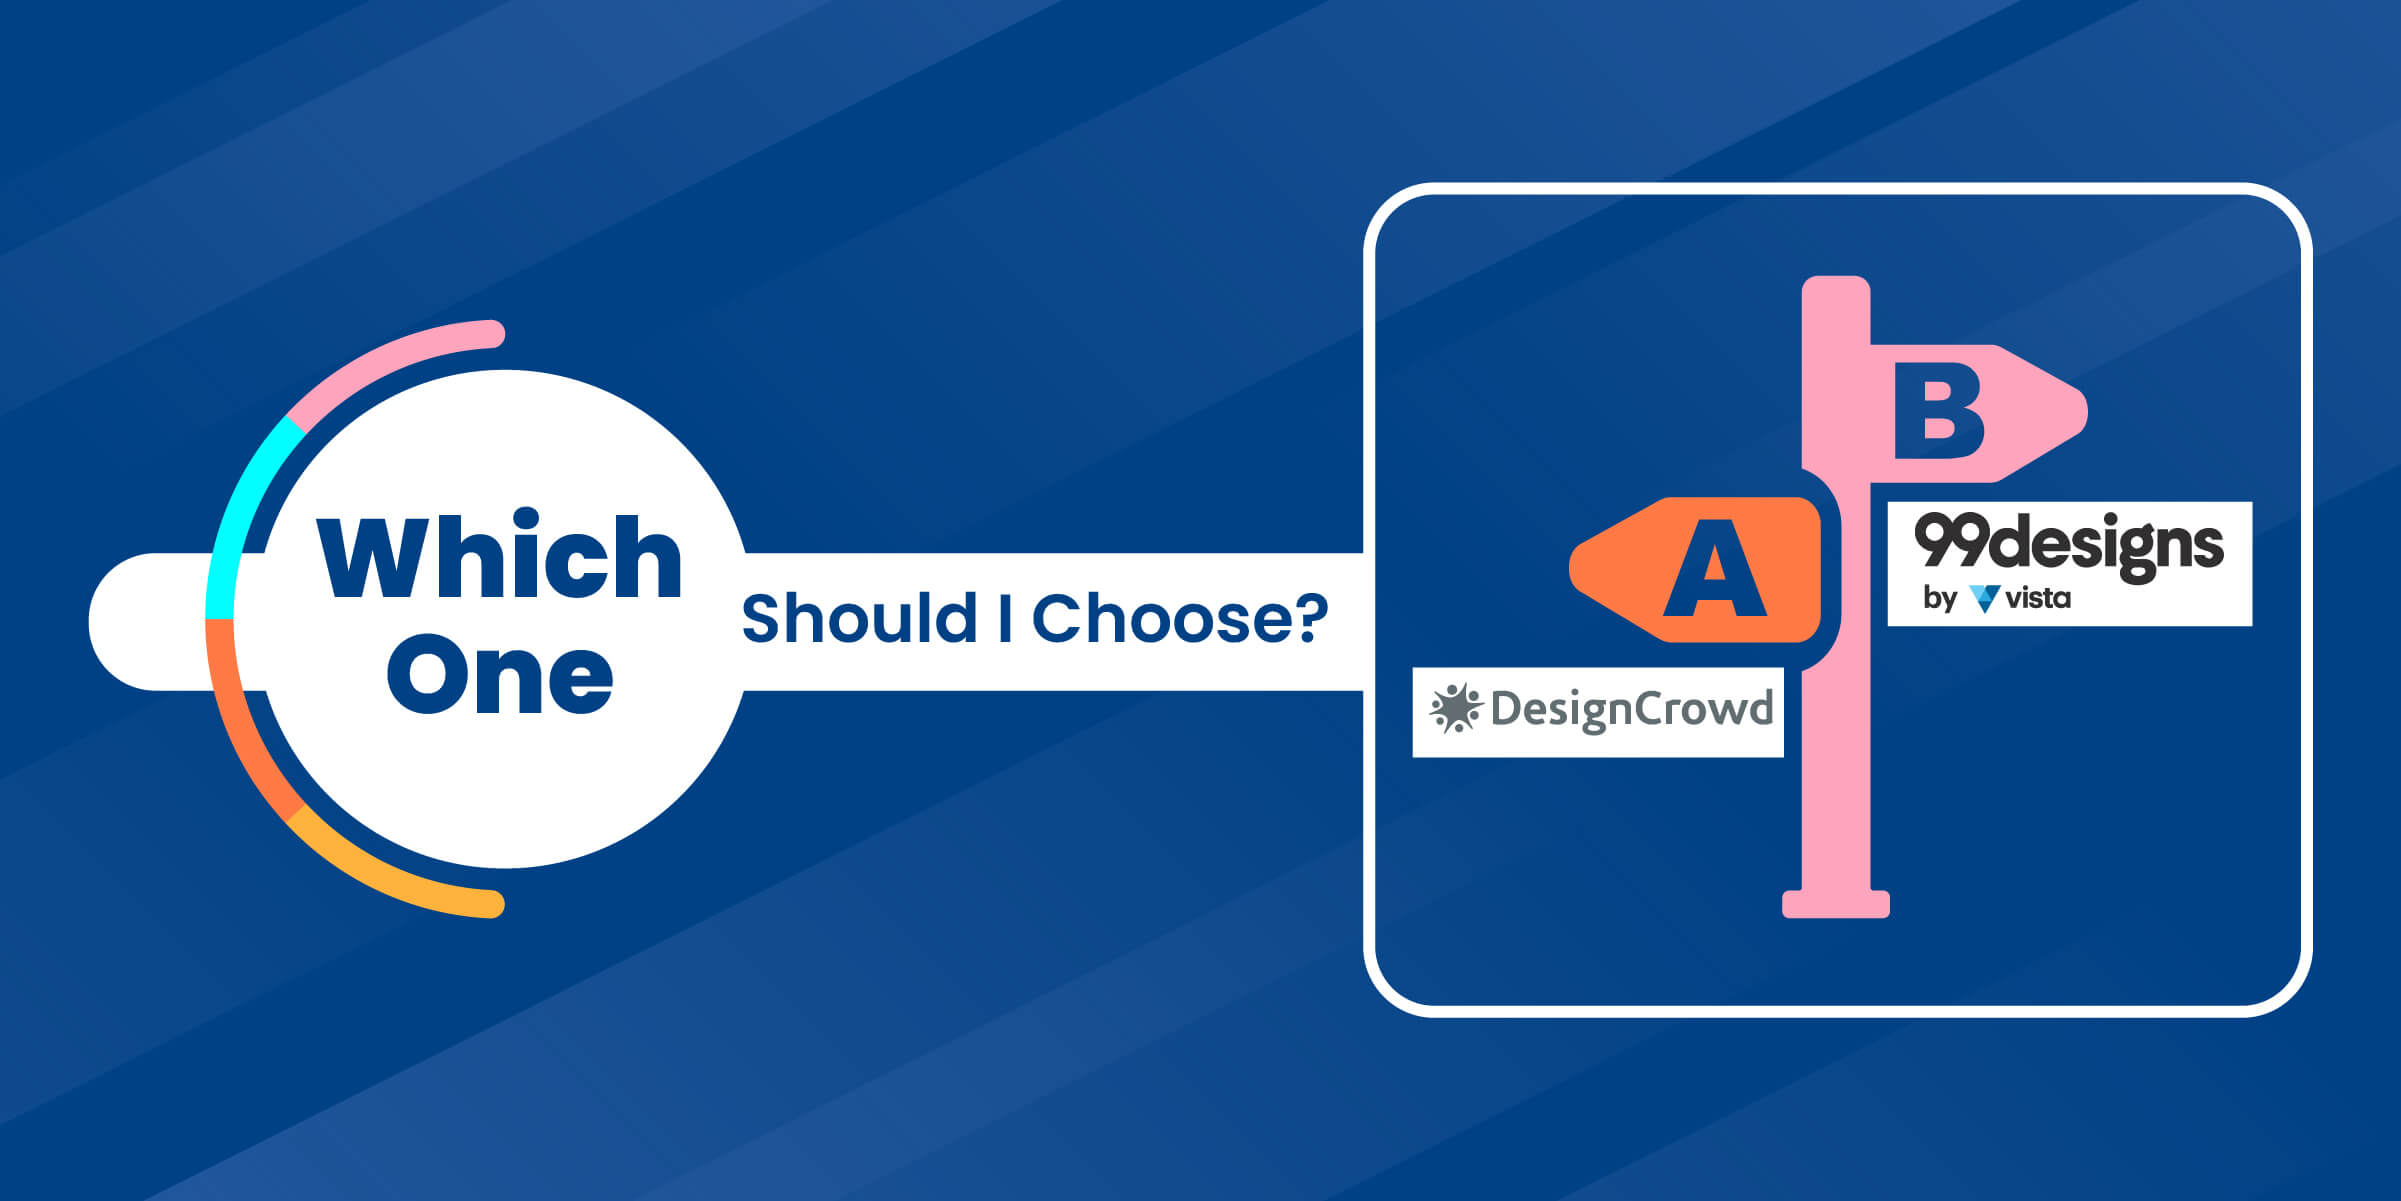 Which One Should I Choose 99Designs or DesignCrowd